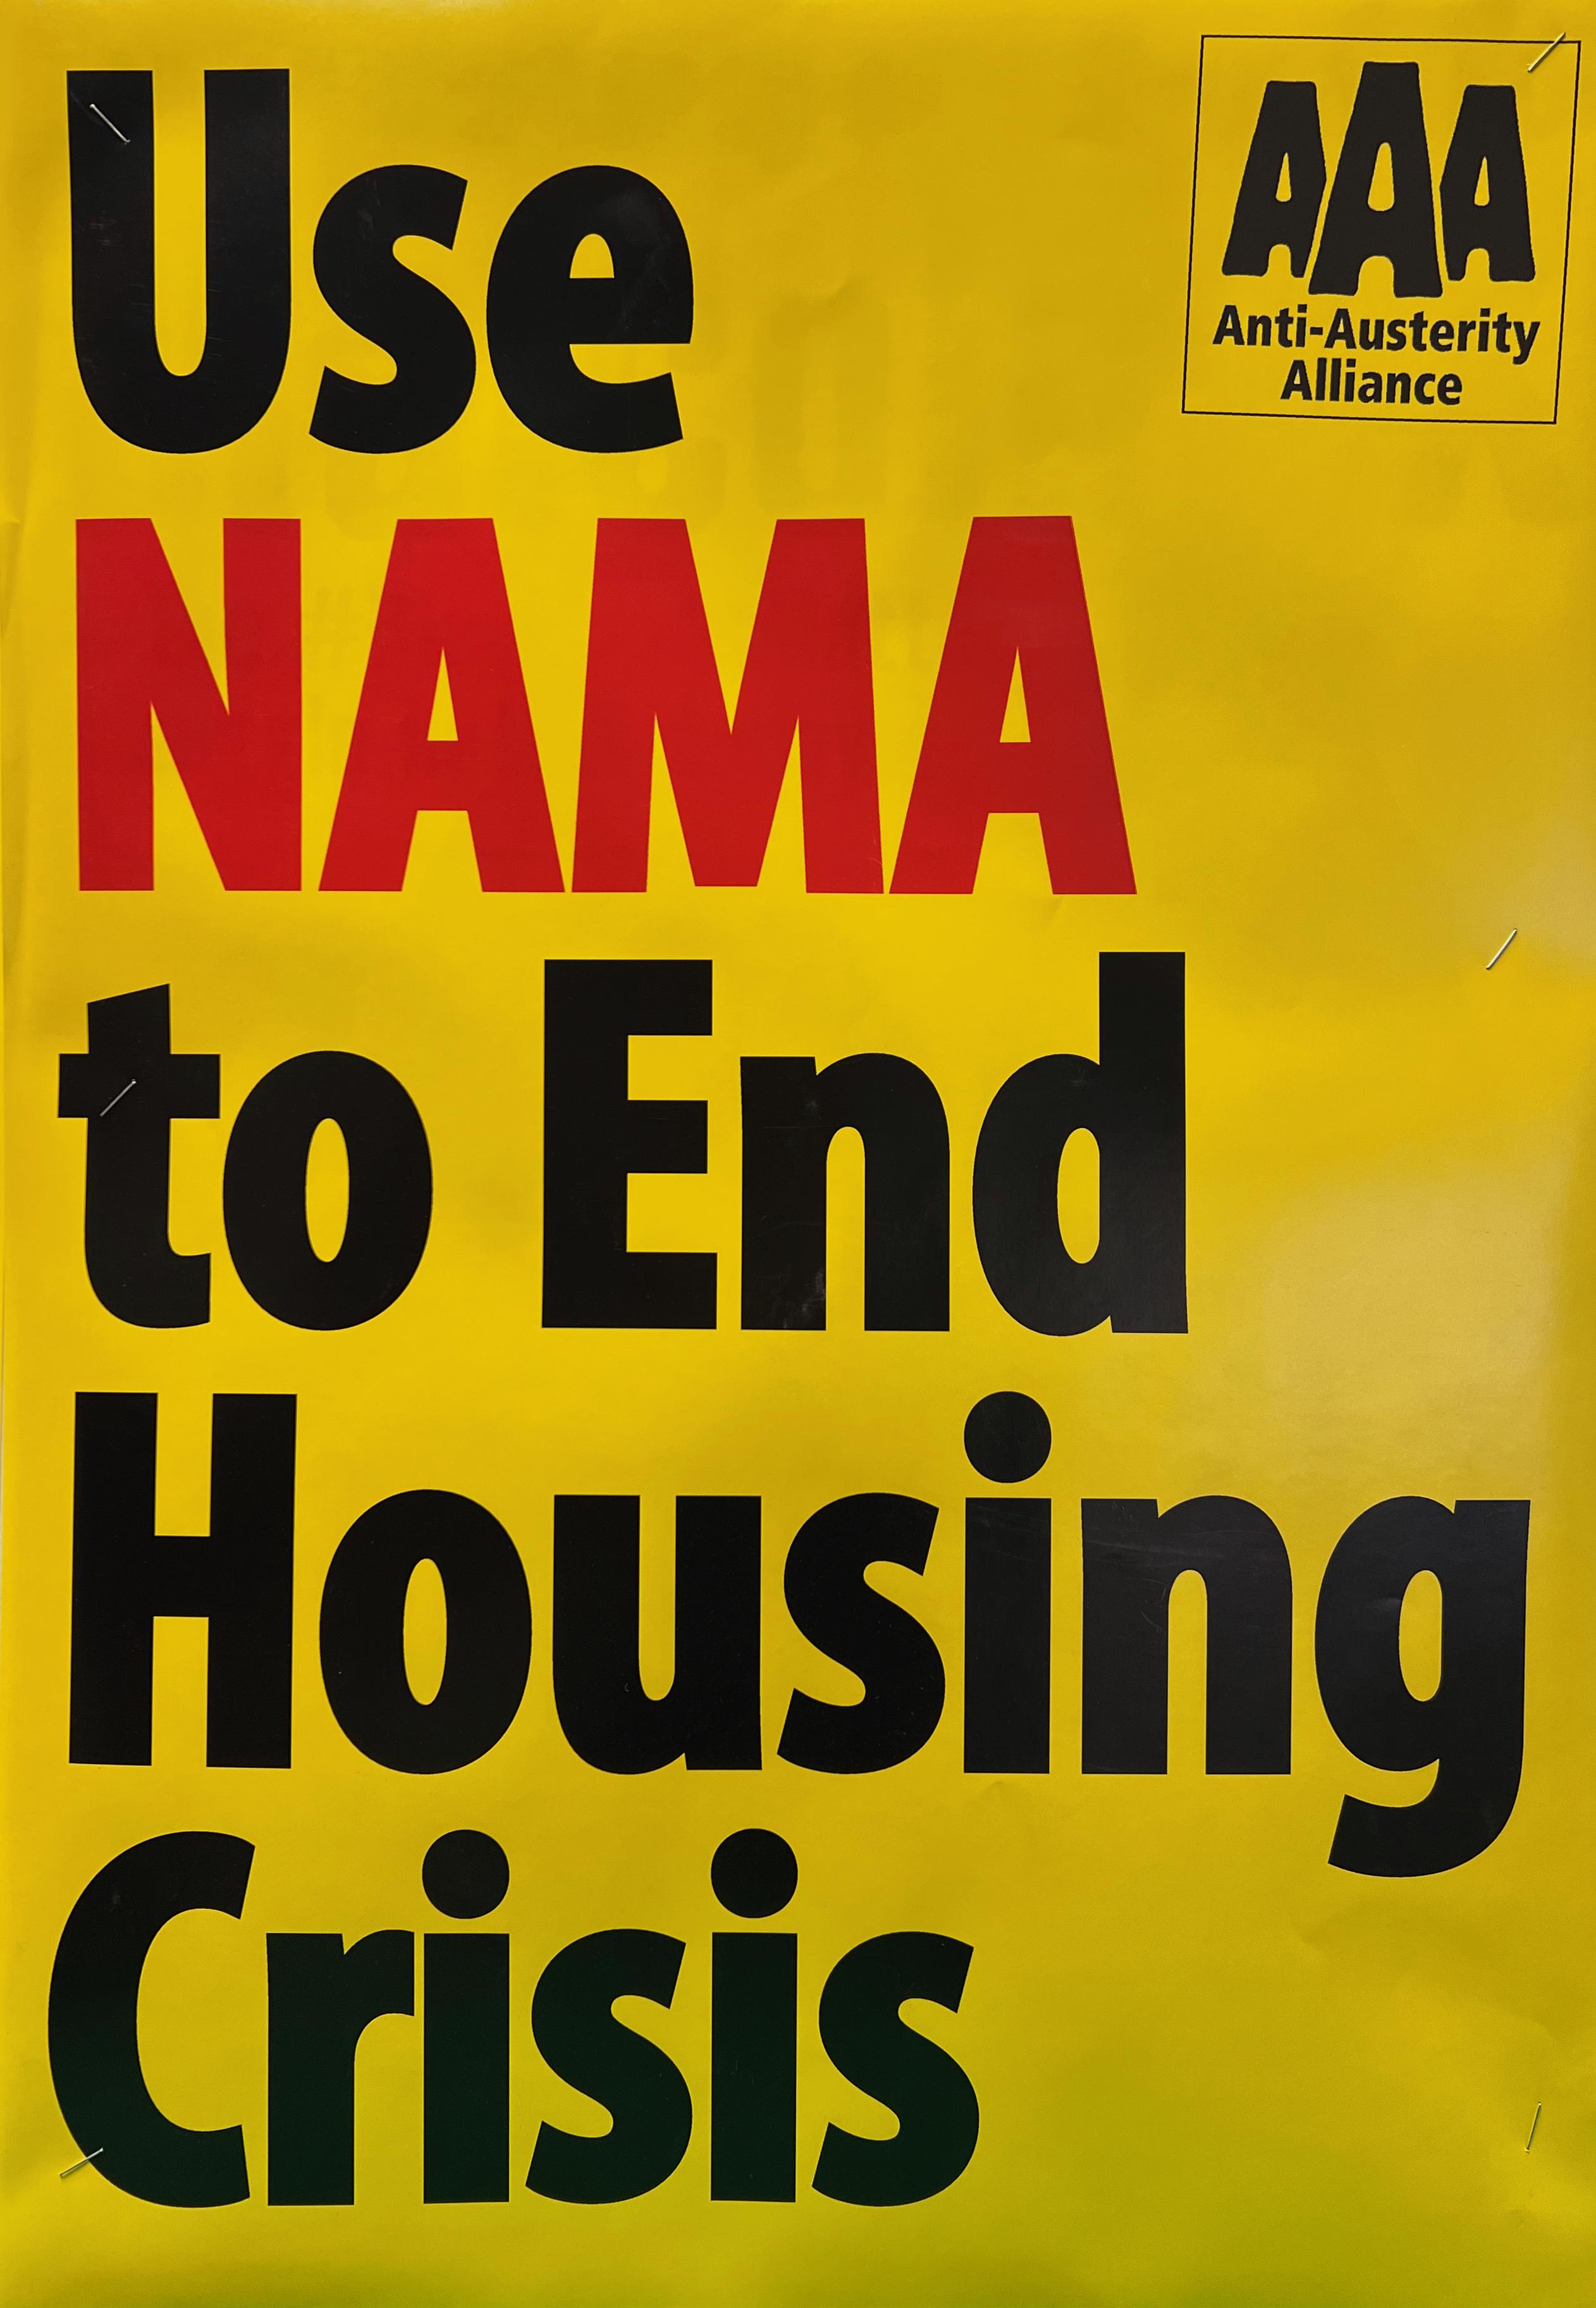  A poster with a yellow background and black and red sans-serif text reading: Use NAMA to End Housing Crisis; and featuring the Anti-Austerity Alliance logo in the top right corner. 